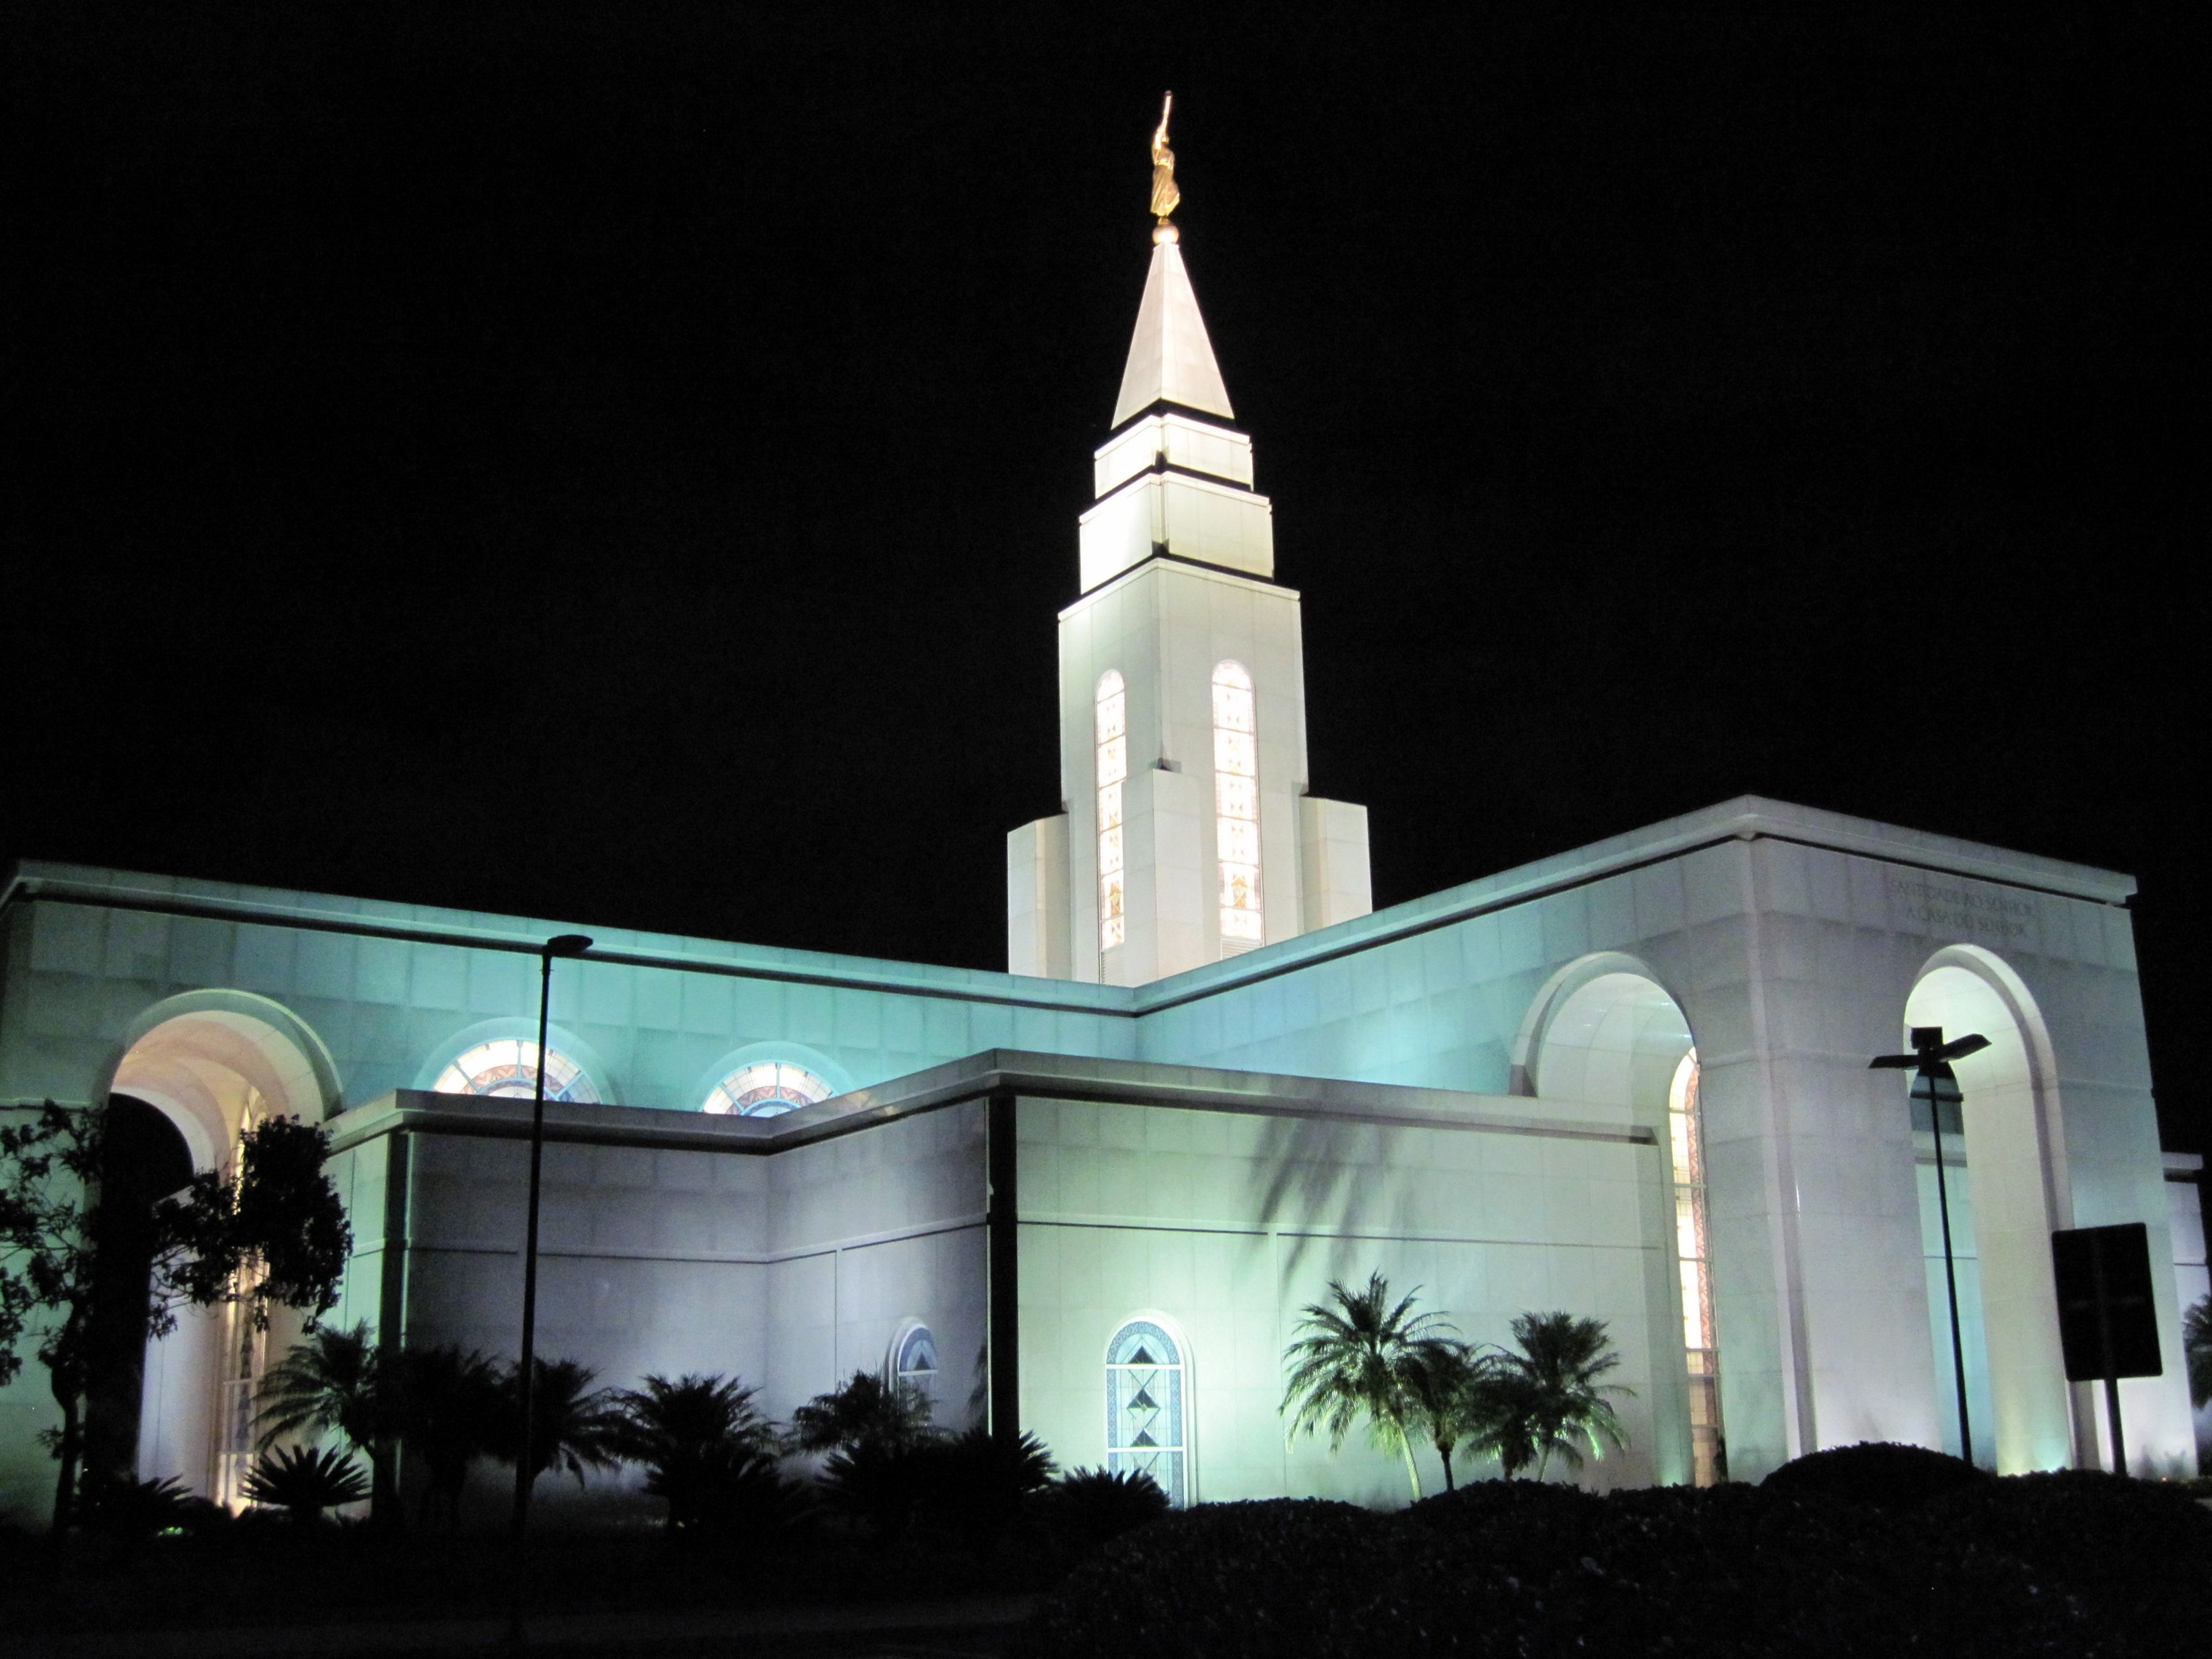 An exterior view of the Campinas Brazil Temple lit up at night.